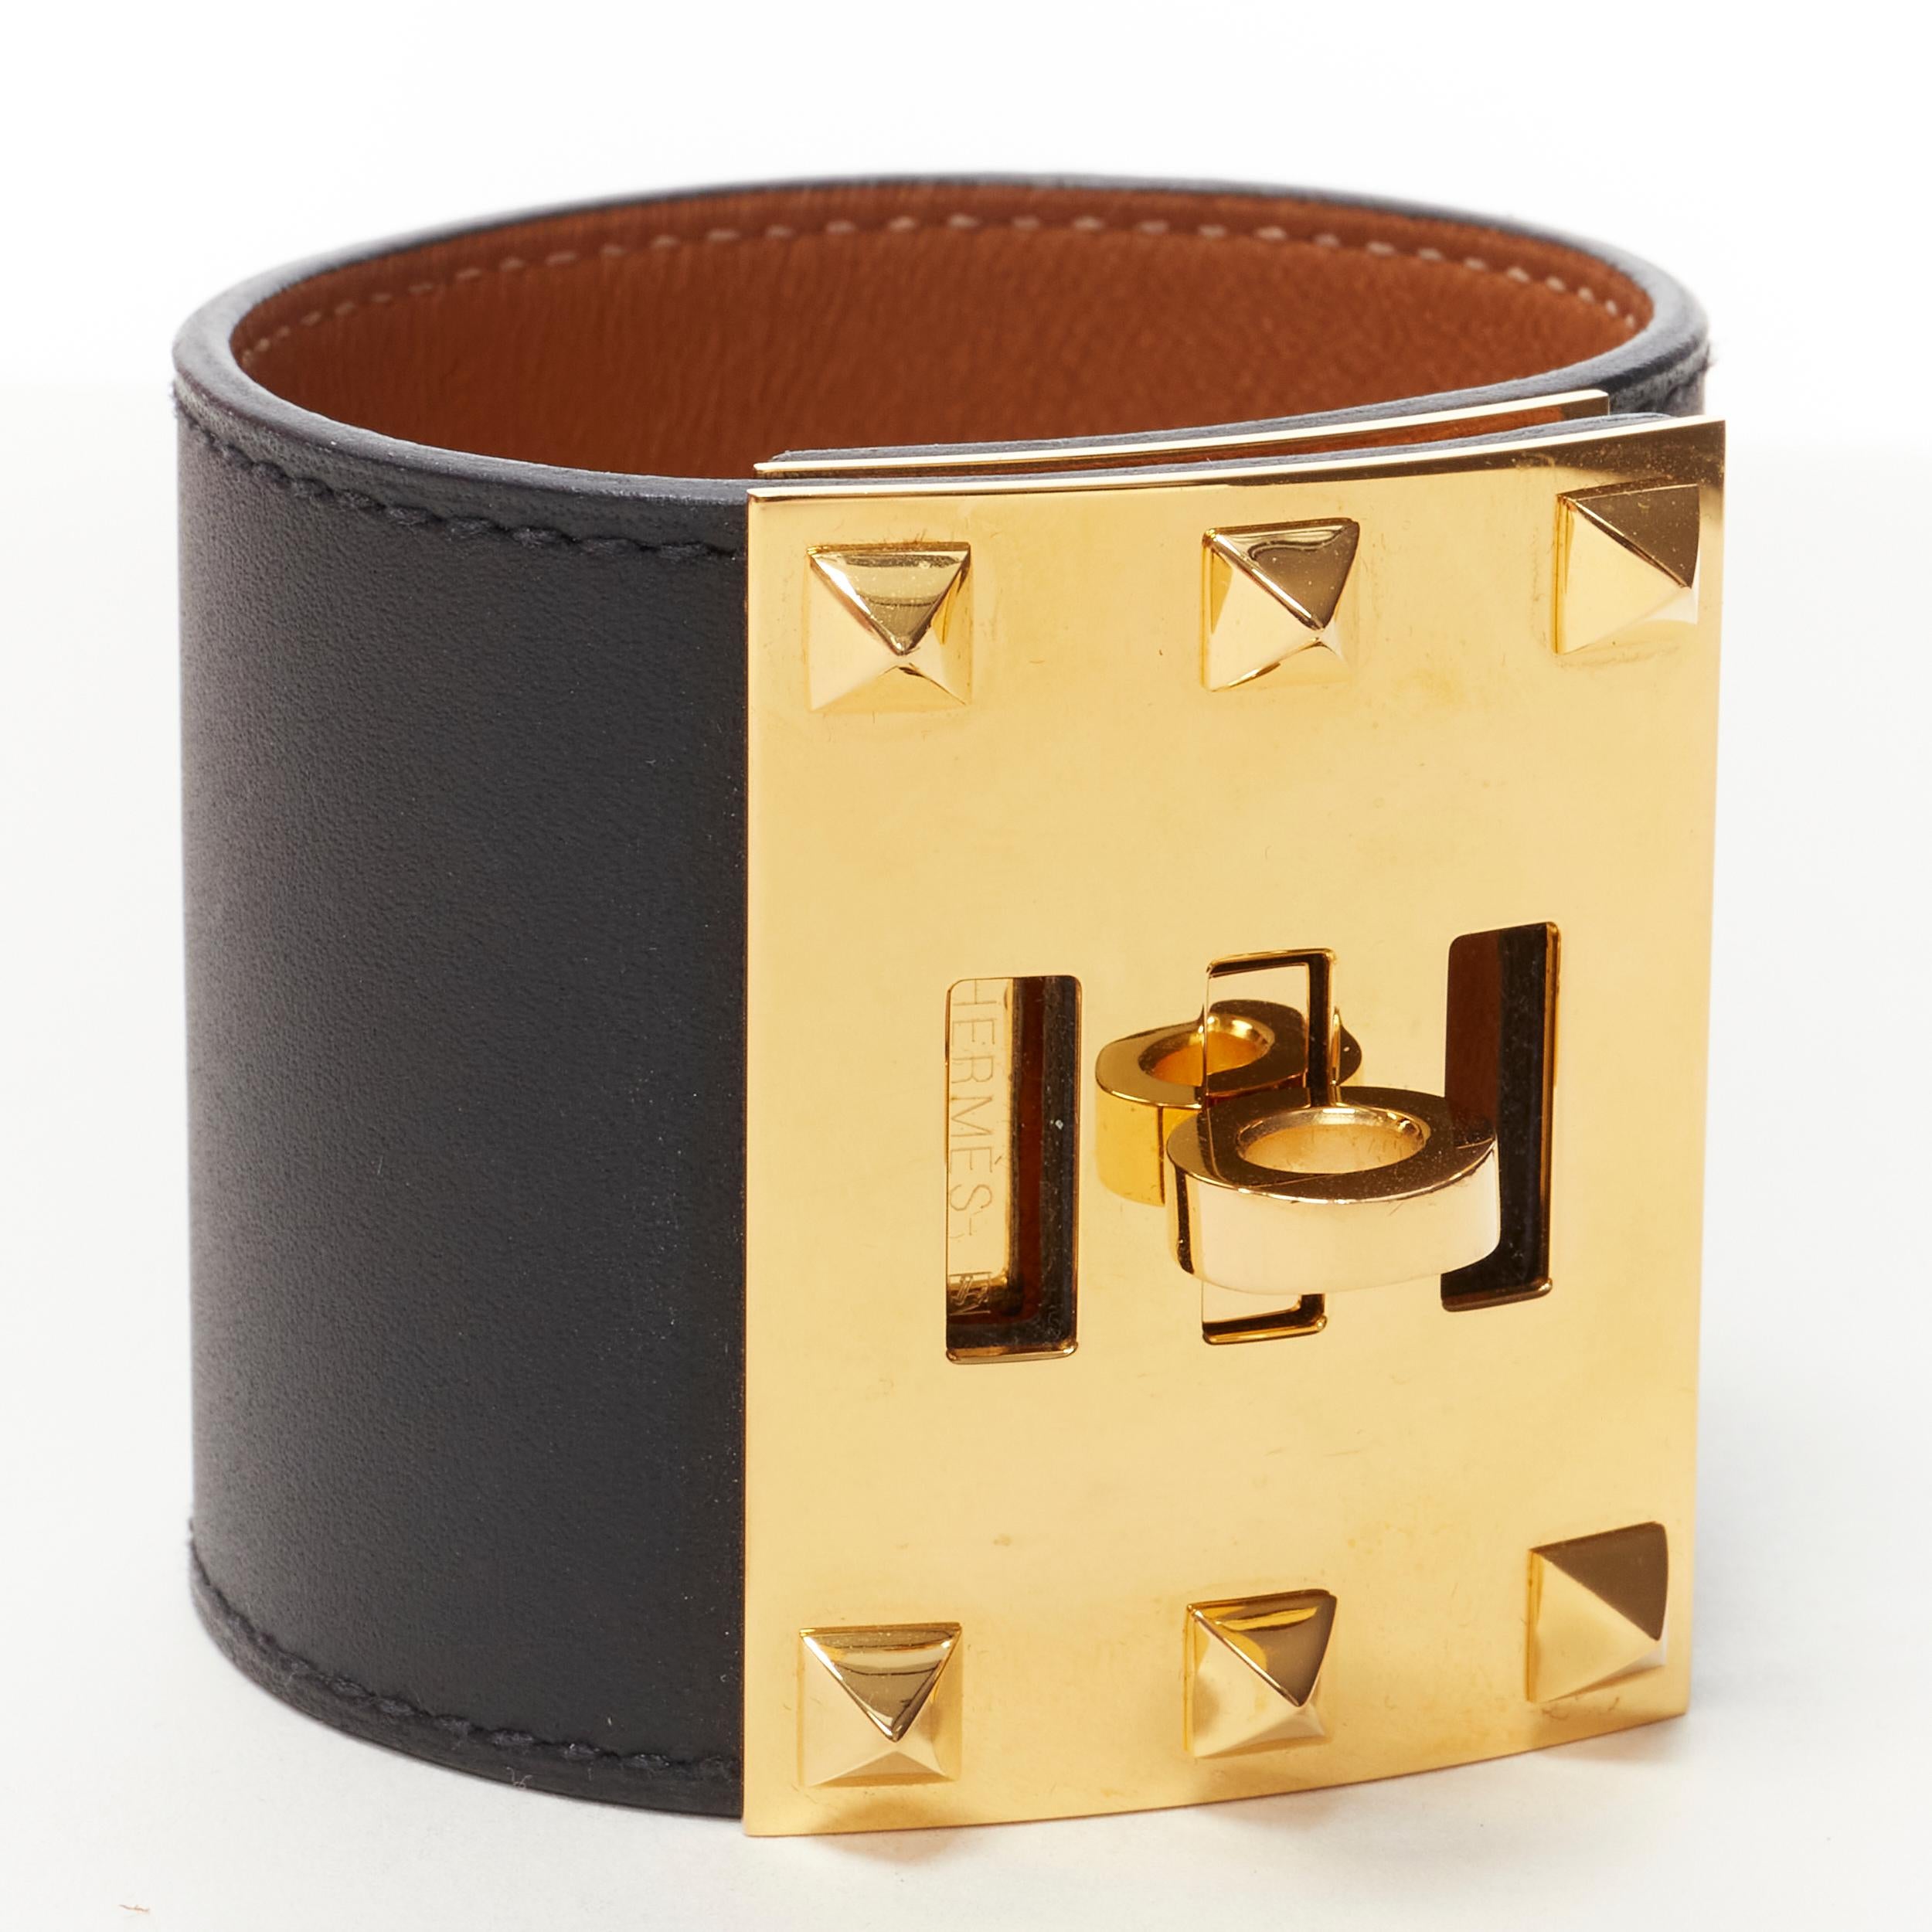 HERMES Kelly Dog Extreme 18k yellow gold plated brass turnlock stud black cuff 
Reference: KEDG/A00016 
Brand: Hermes 
Collection: Kelly 
Material: Leather 
Color: Black 
Pattern: Solid 
Closure: Turnlock 
Extra Detail: 18K yellow gold-plated brass.